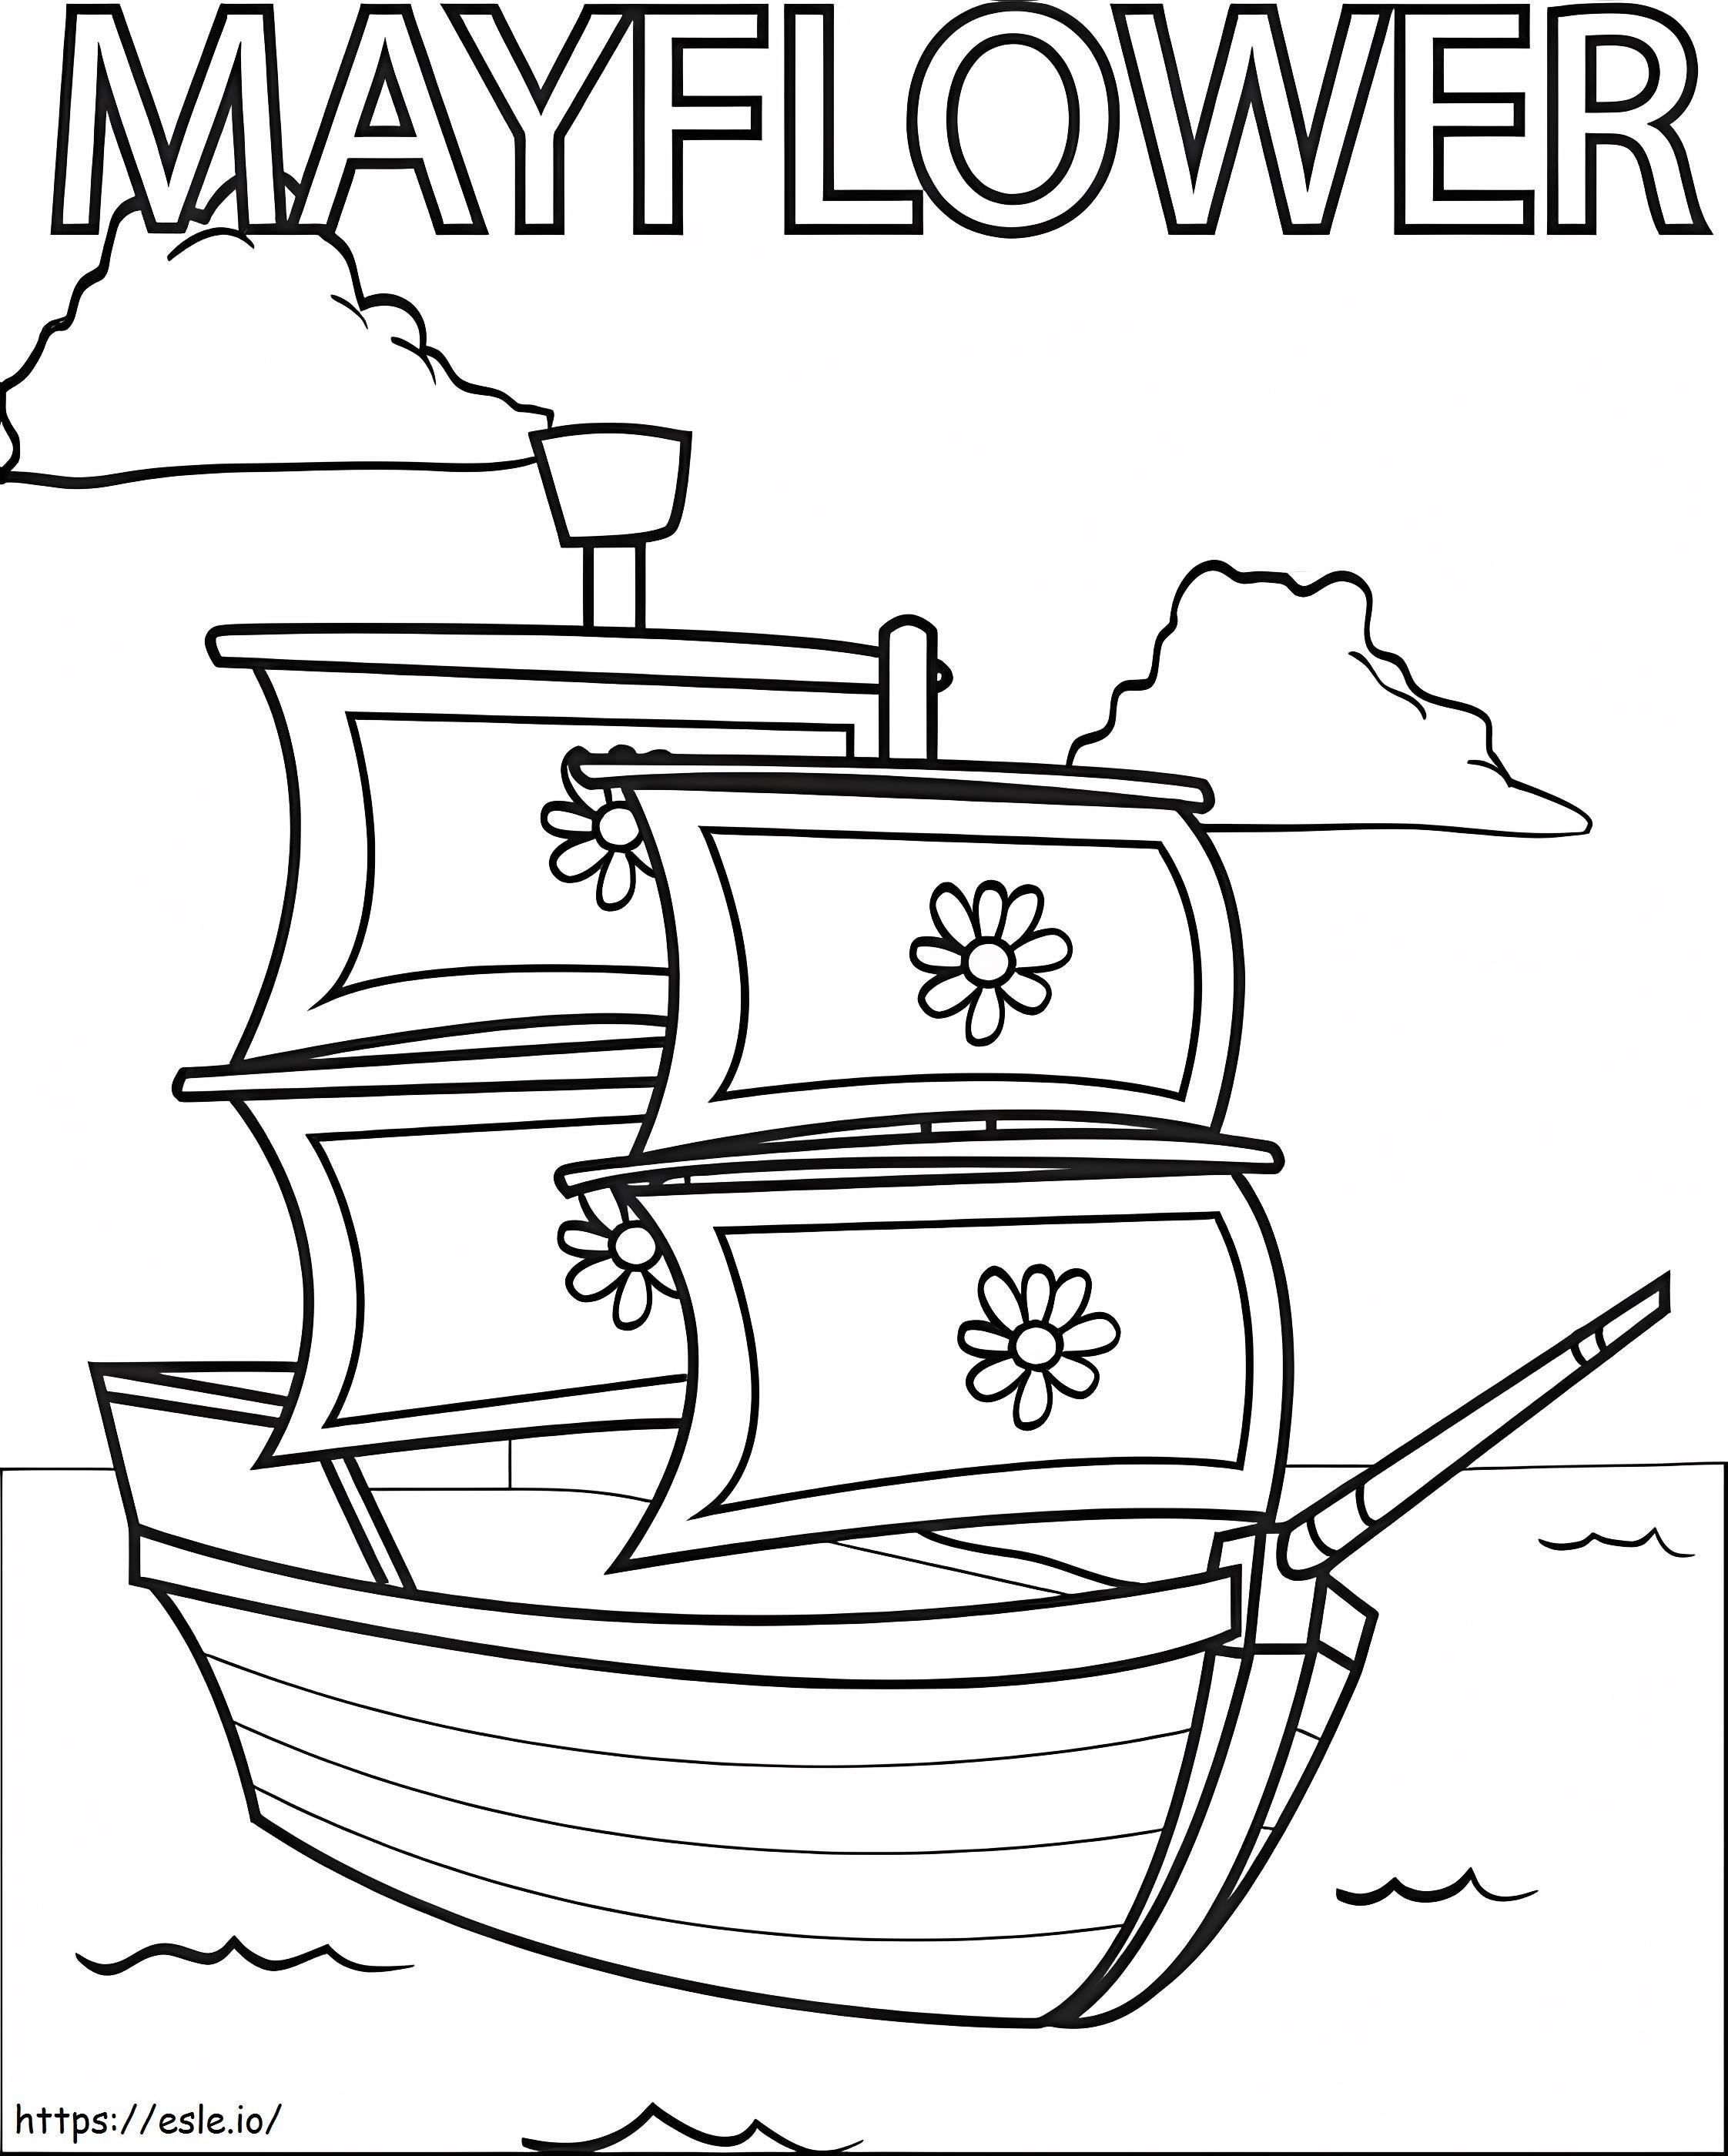 Mayflower 5 coloring page